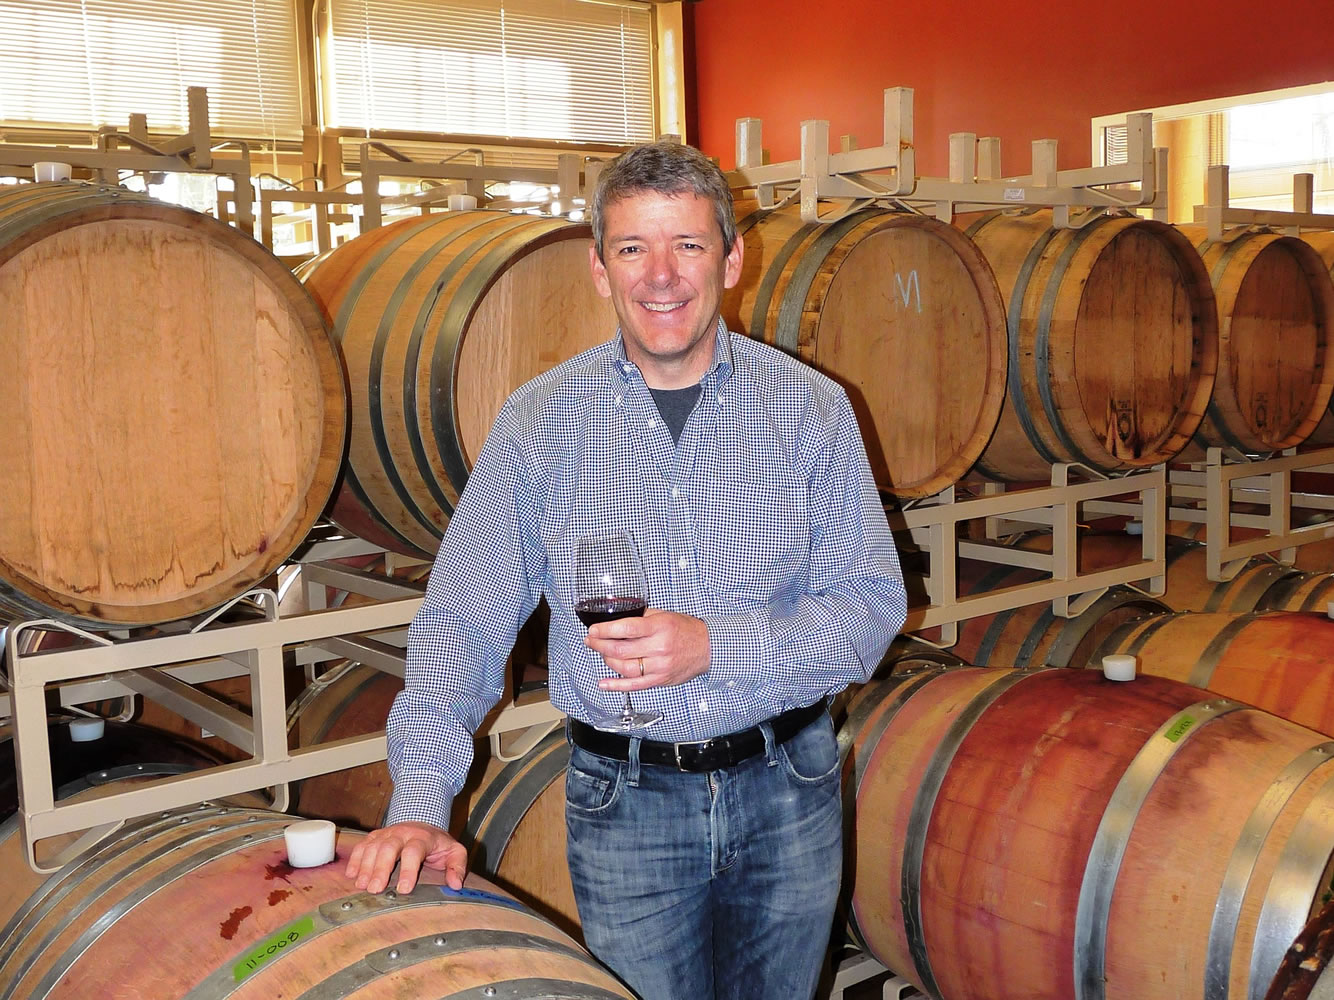 Viki Eierdam
Winemaker David Smith blended his interest in chemistry, biology and wine to create a second career at Burnt Bridge Cellars in downtown Vancouver.